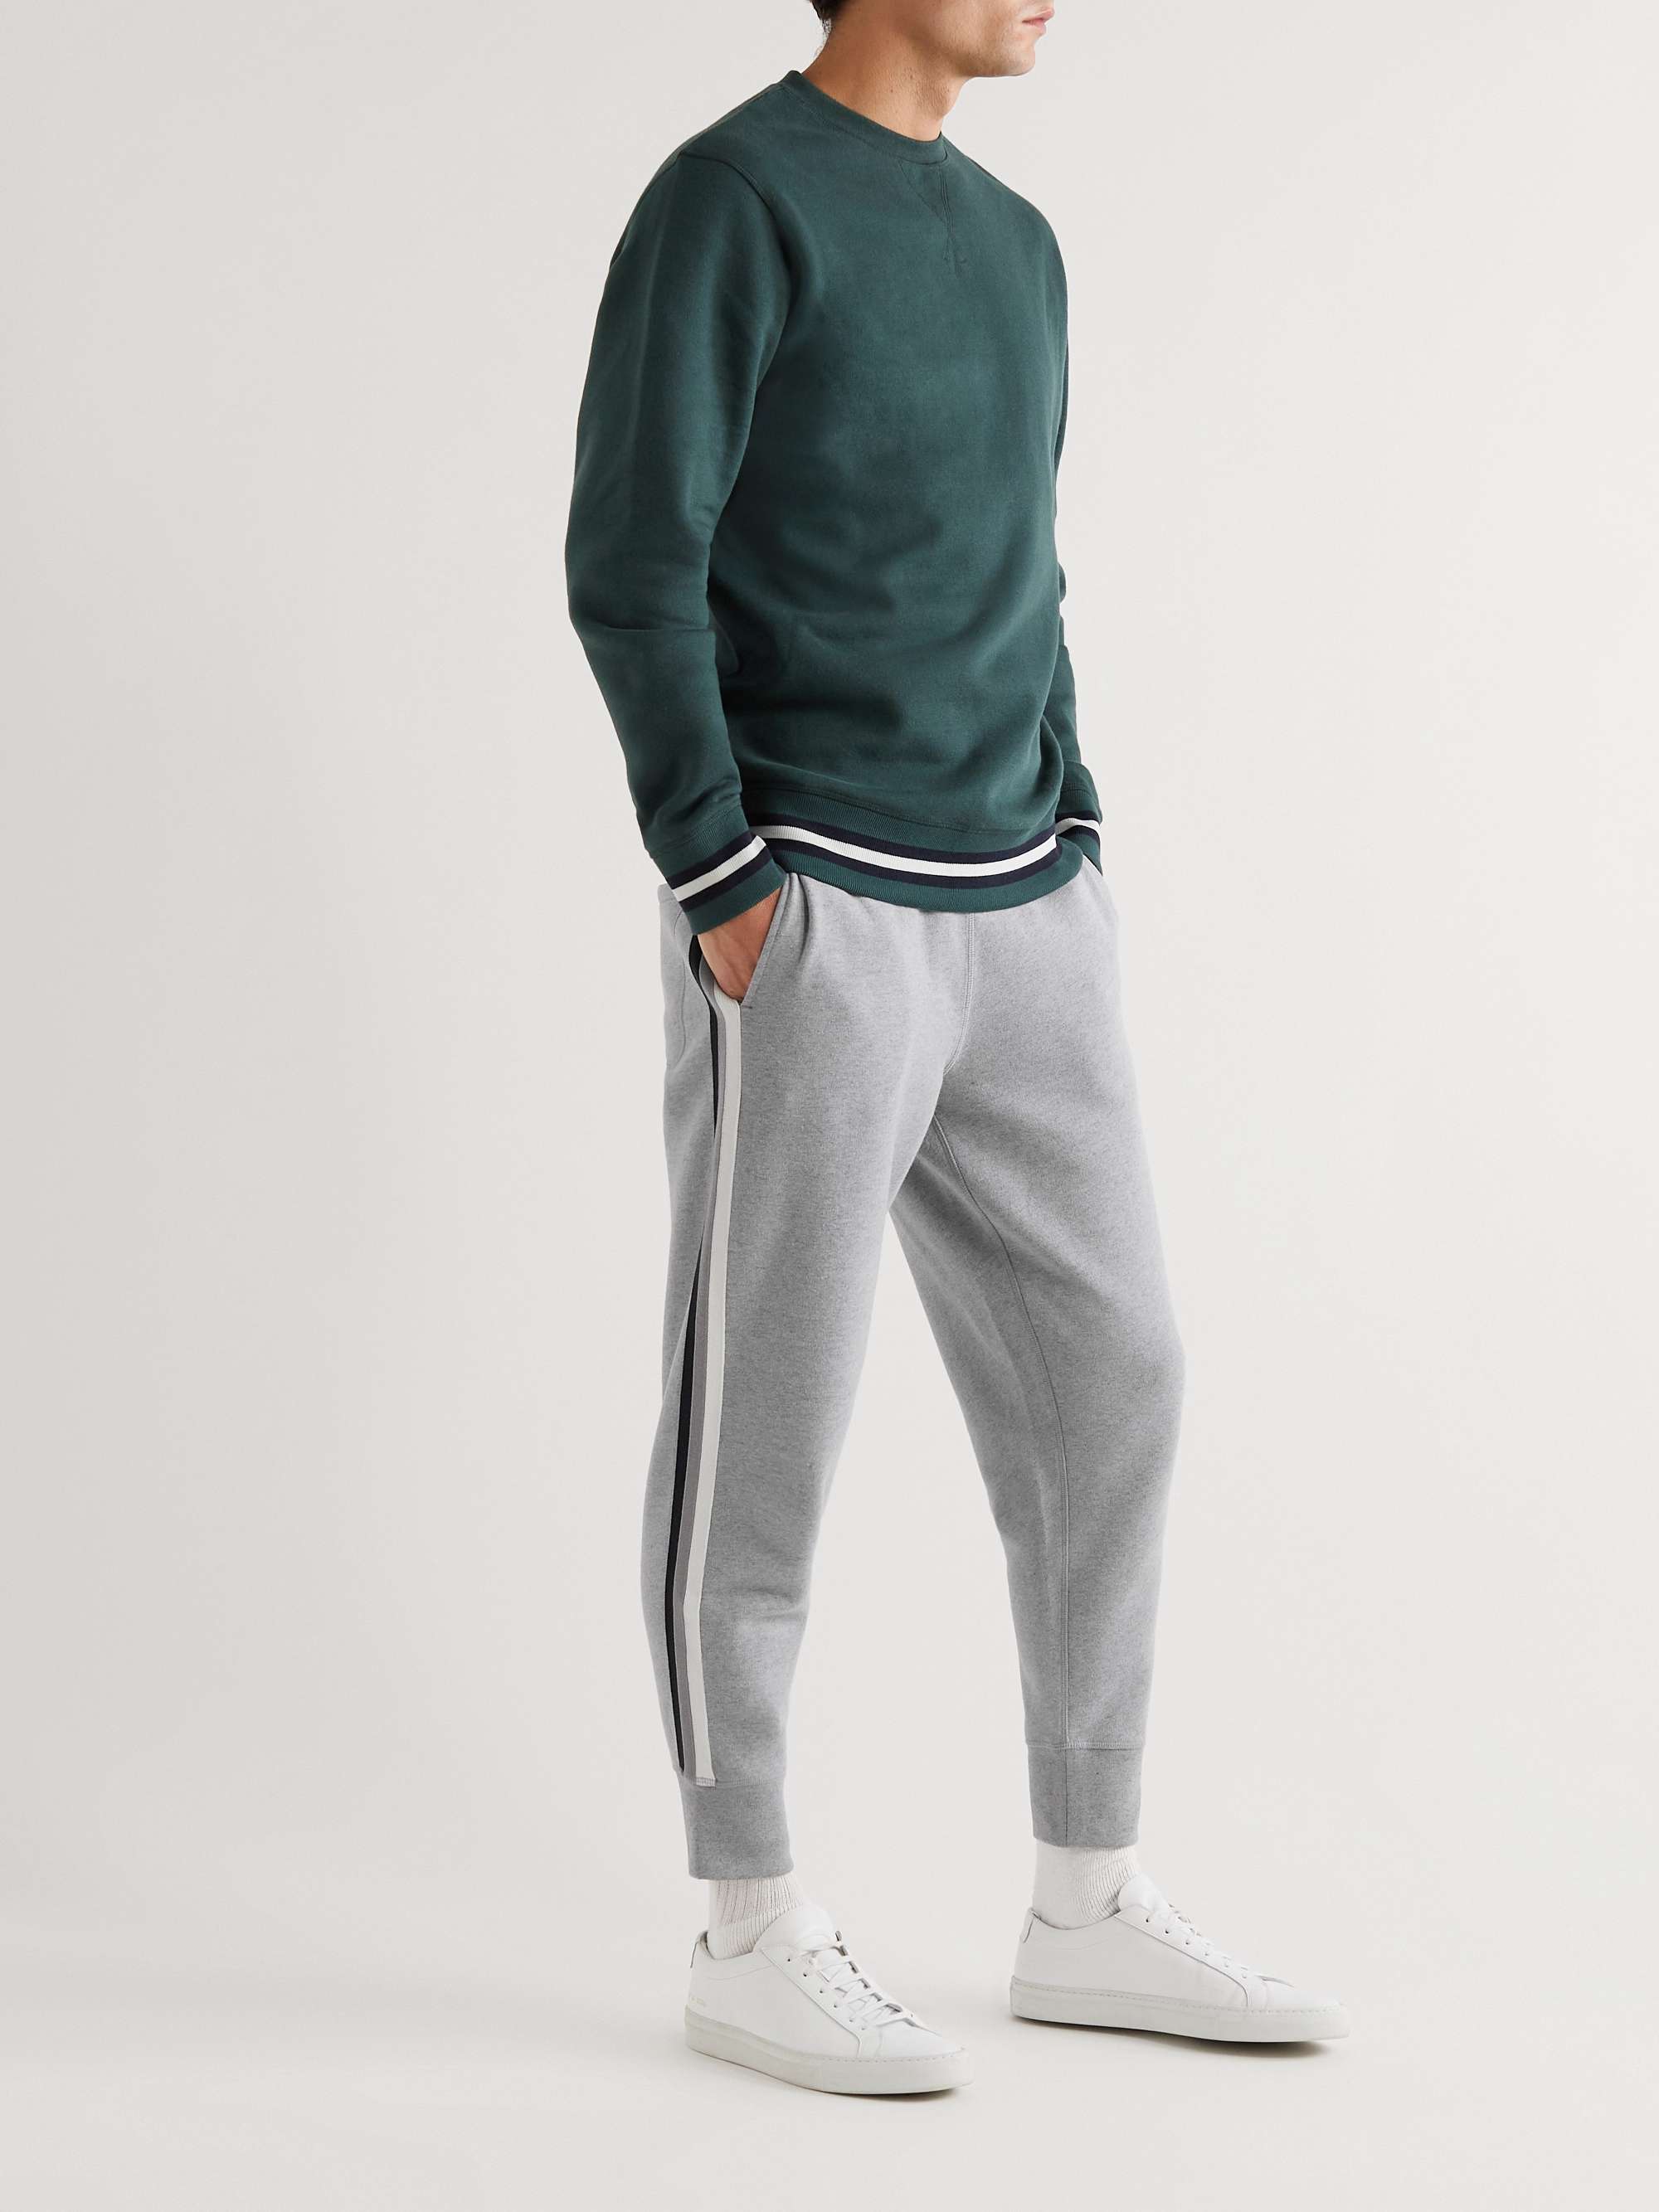 KINGSMAN Tapered Striped Cotton and Cashmere-Blend Jersey Sweatpants